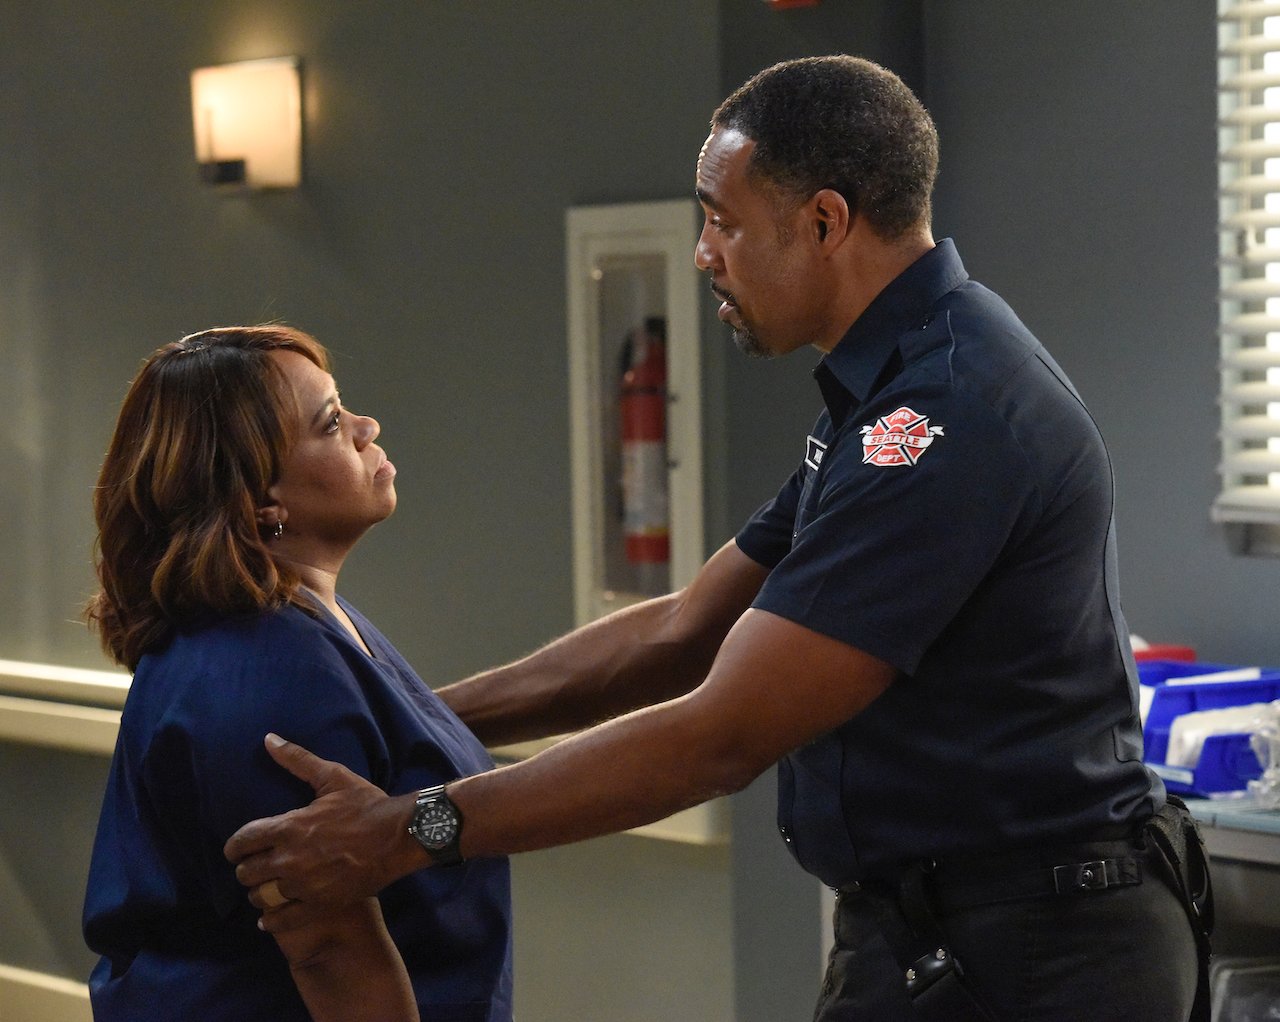 Chandra Wilson as Miranda and Jason George as Ben talk to each other in their uniforms in 'Grey's Anatomy'.